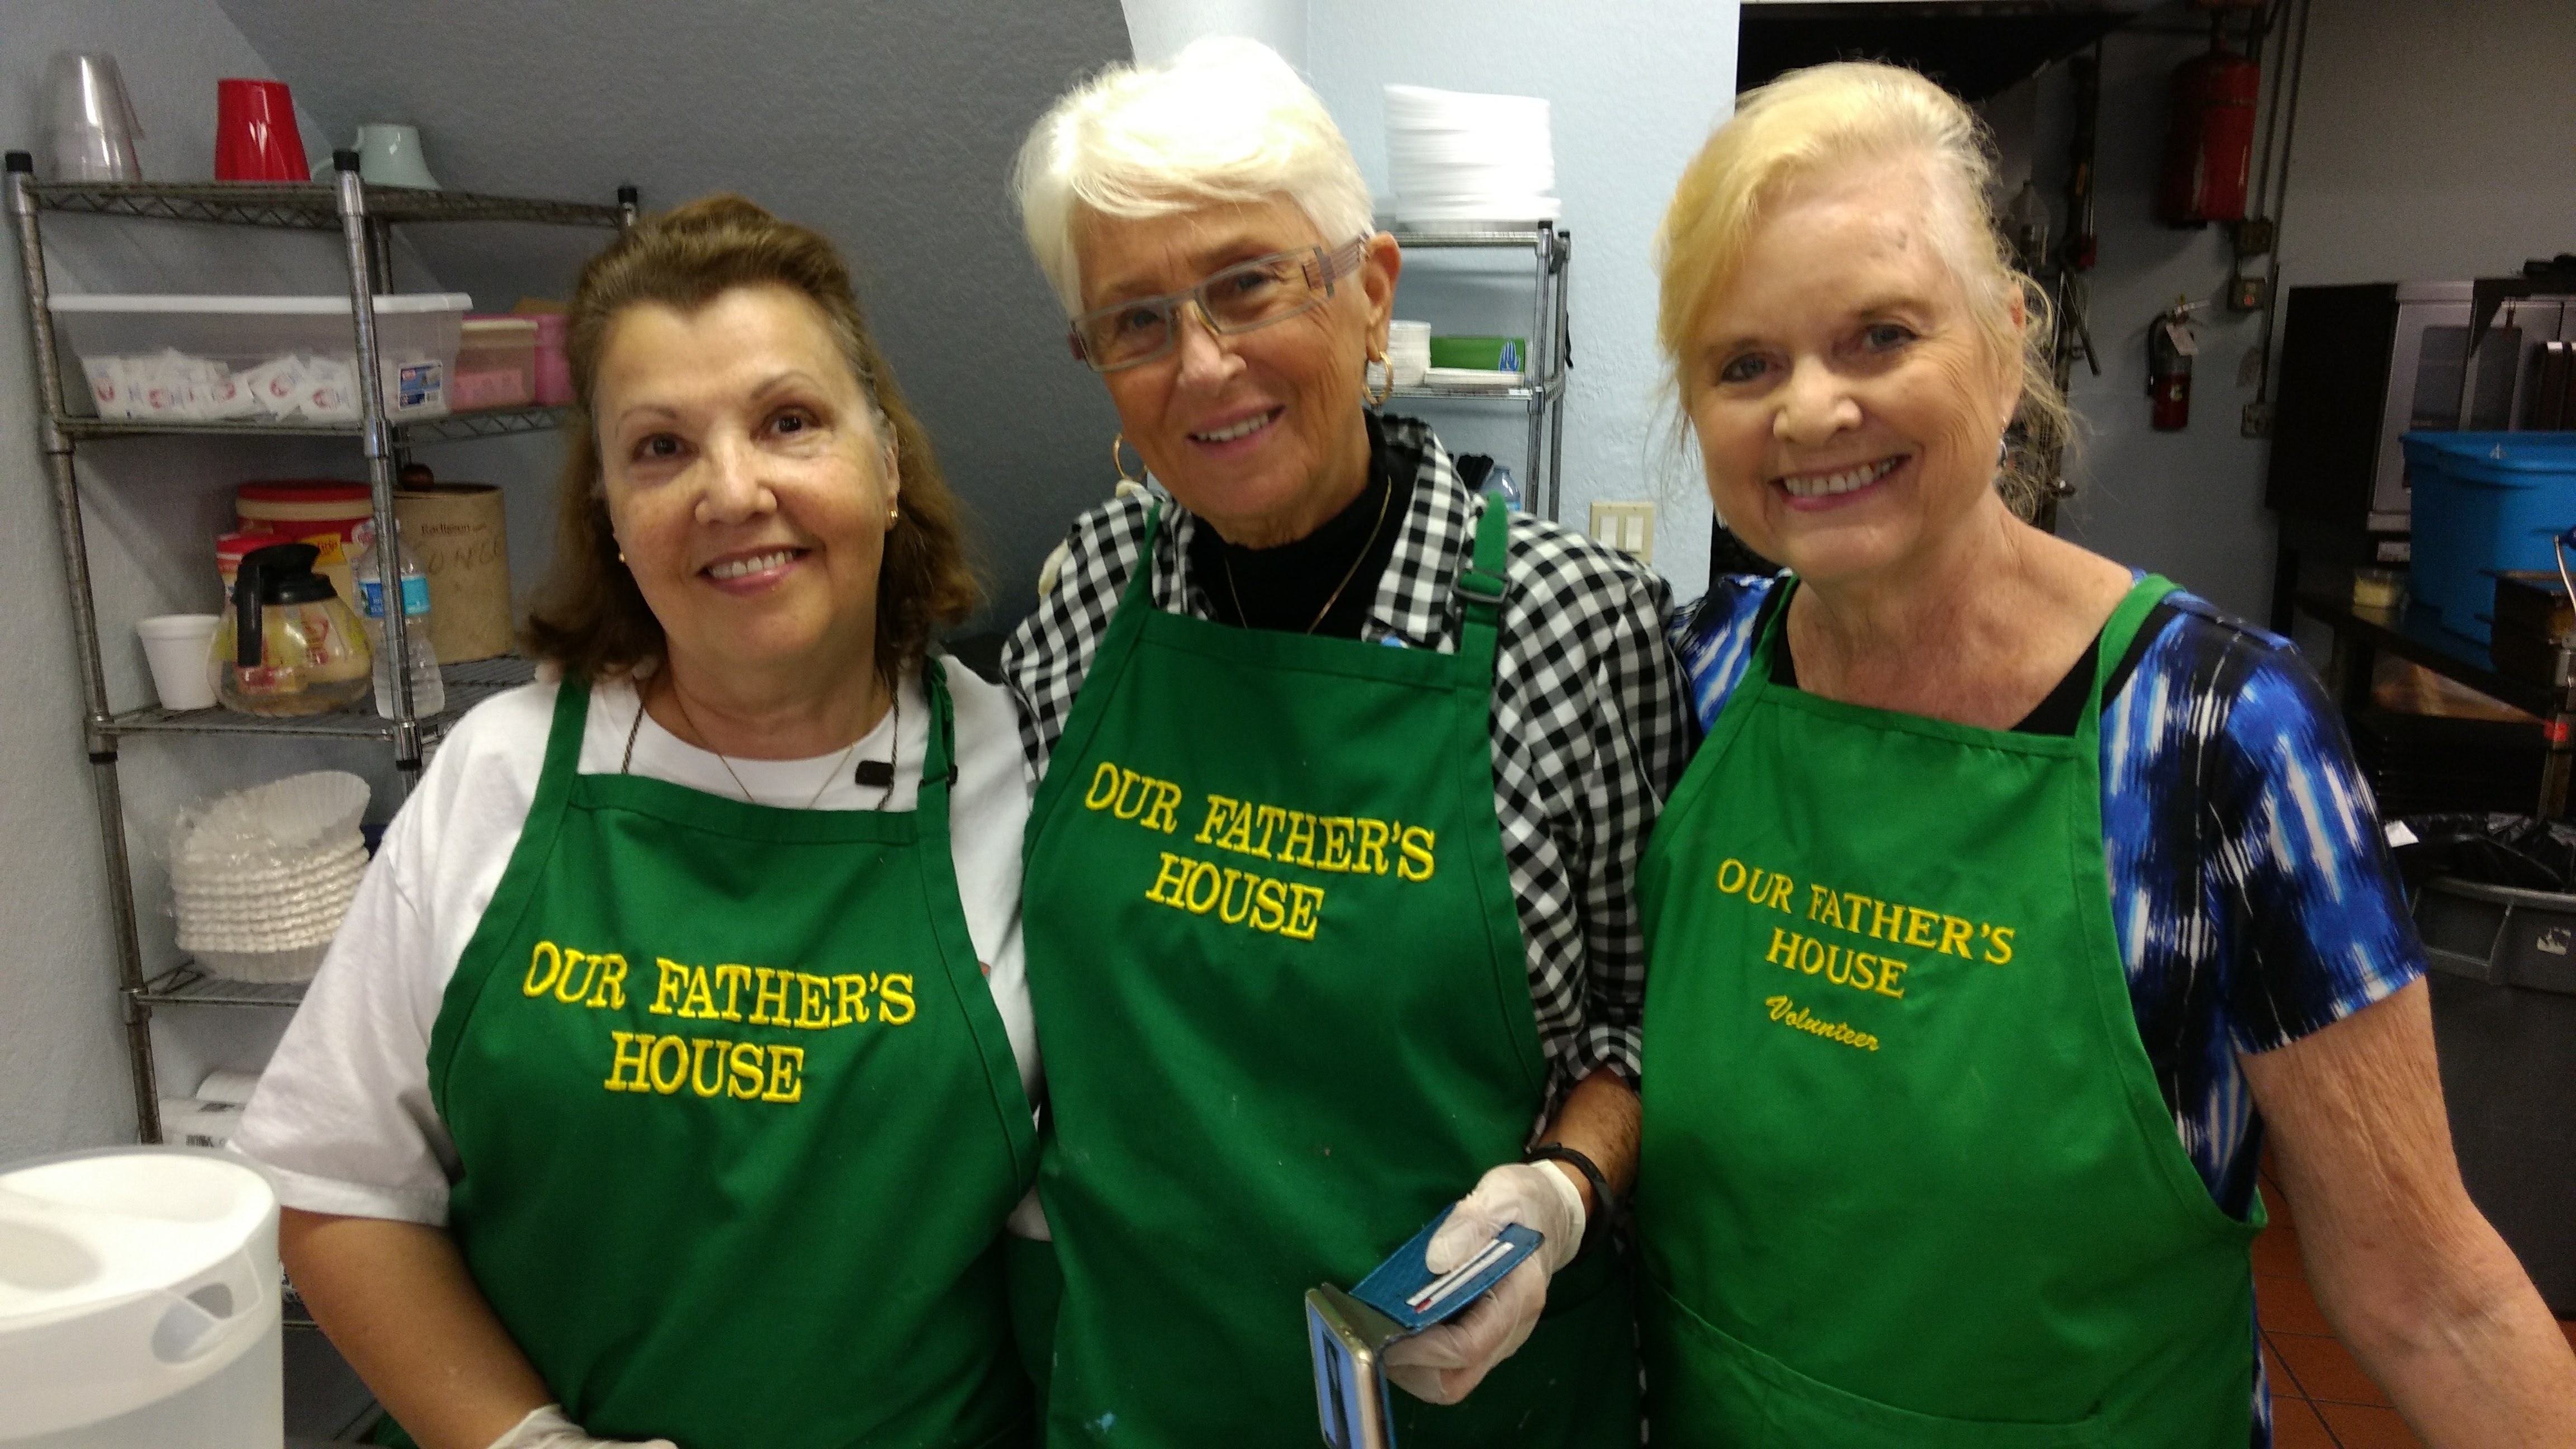 Soup kitchen volunteers take a picture while preparing food for the homeless people.